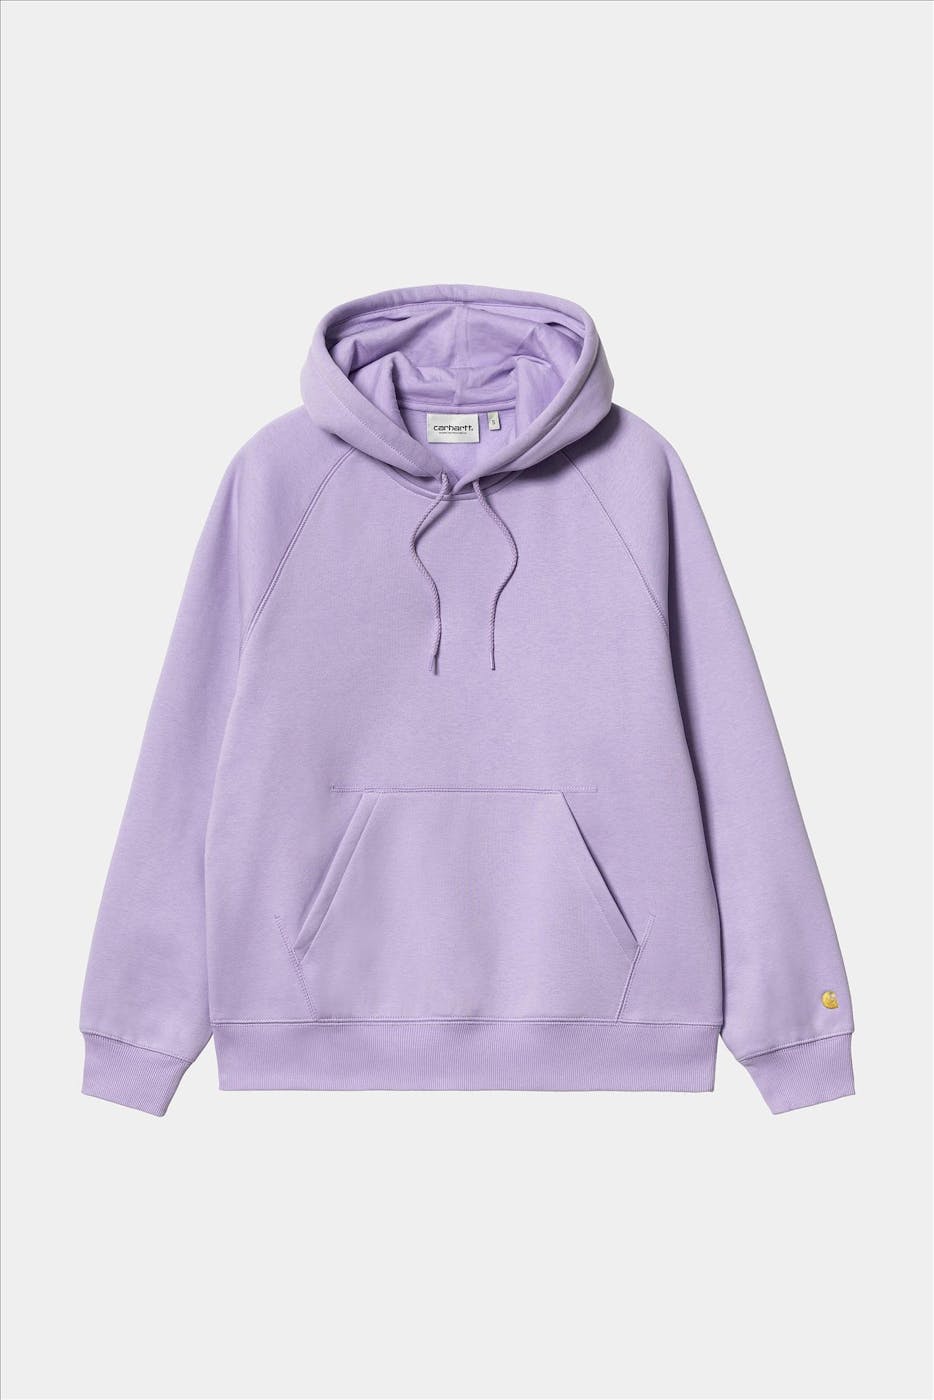 Carhartt WIP - Lichtpaarse Hooded Chase sweater